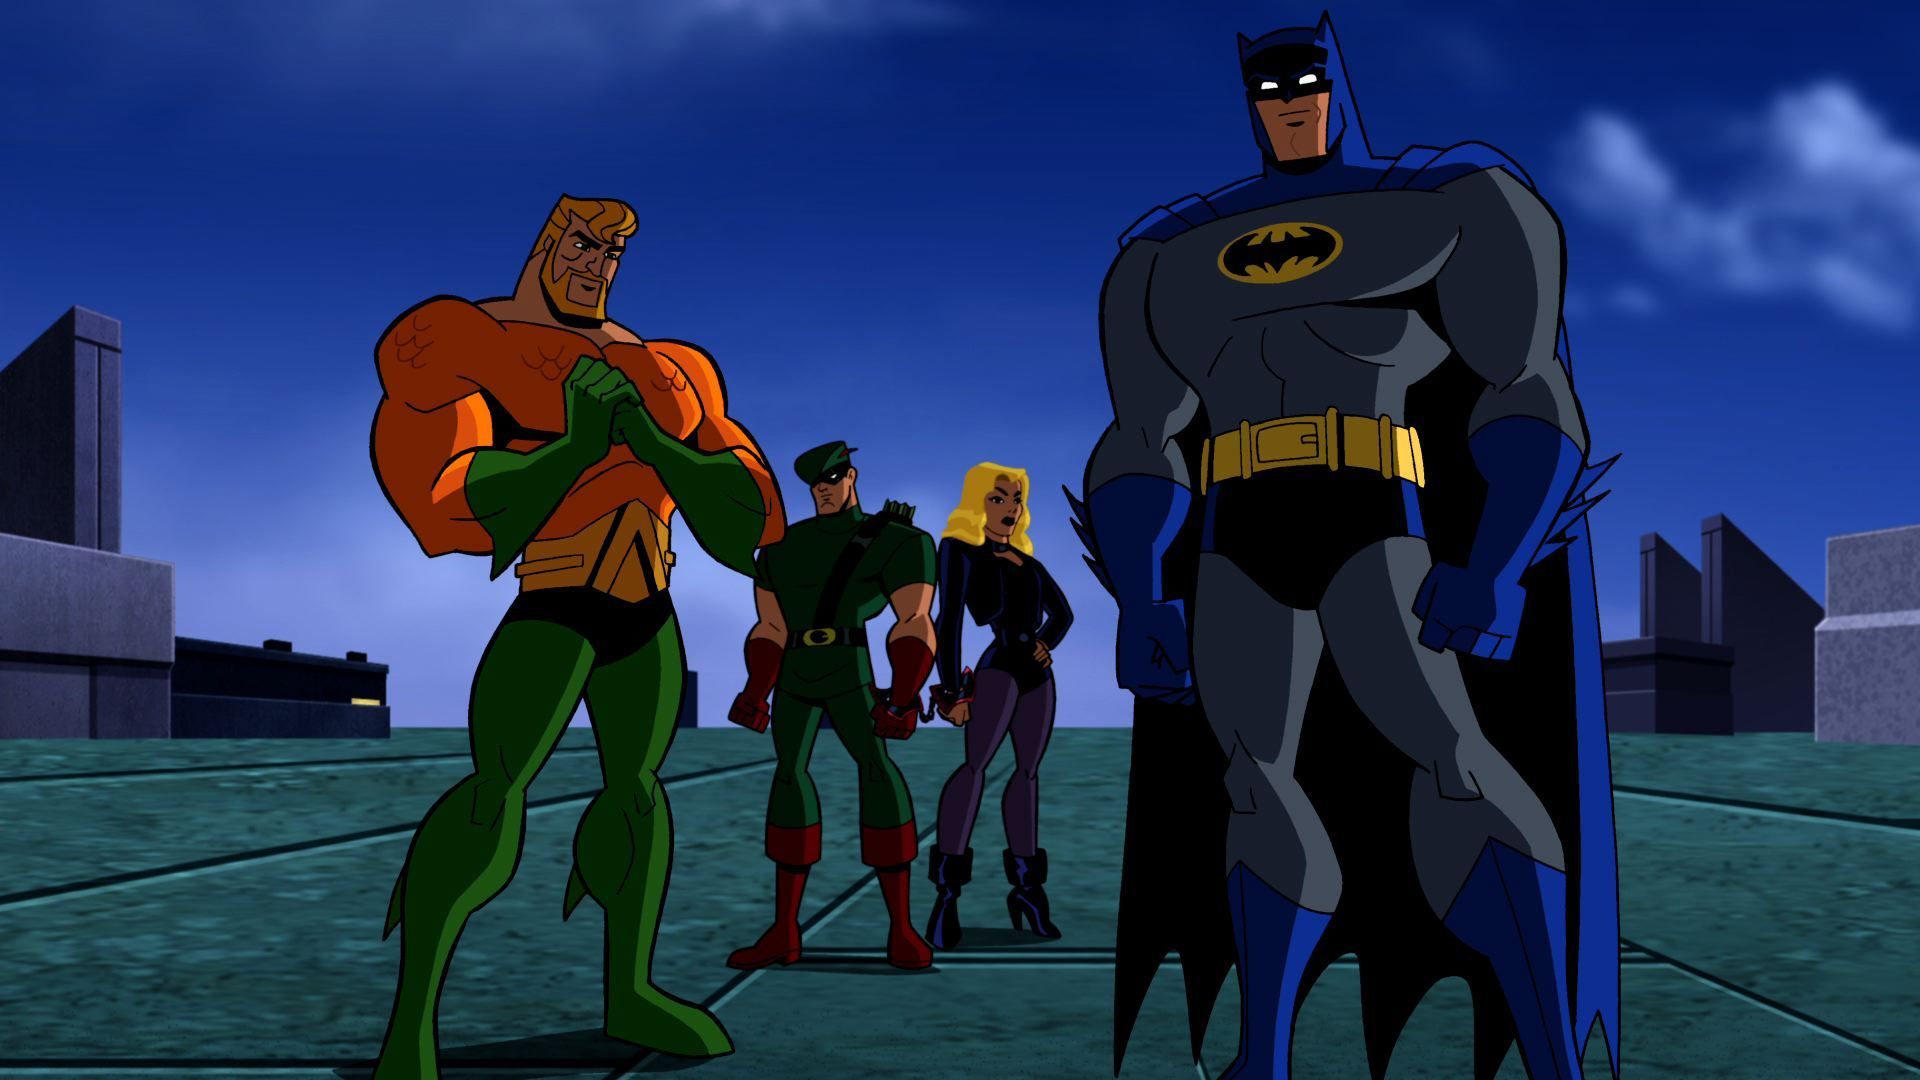 Batman with Aquaman, Green Arrow, and Black Canary in The Brave and the Bold.